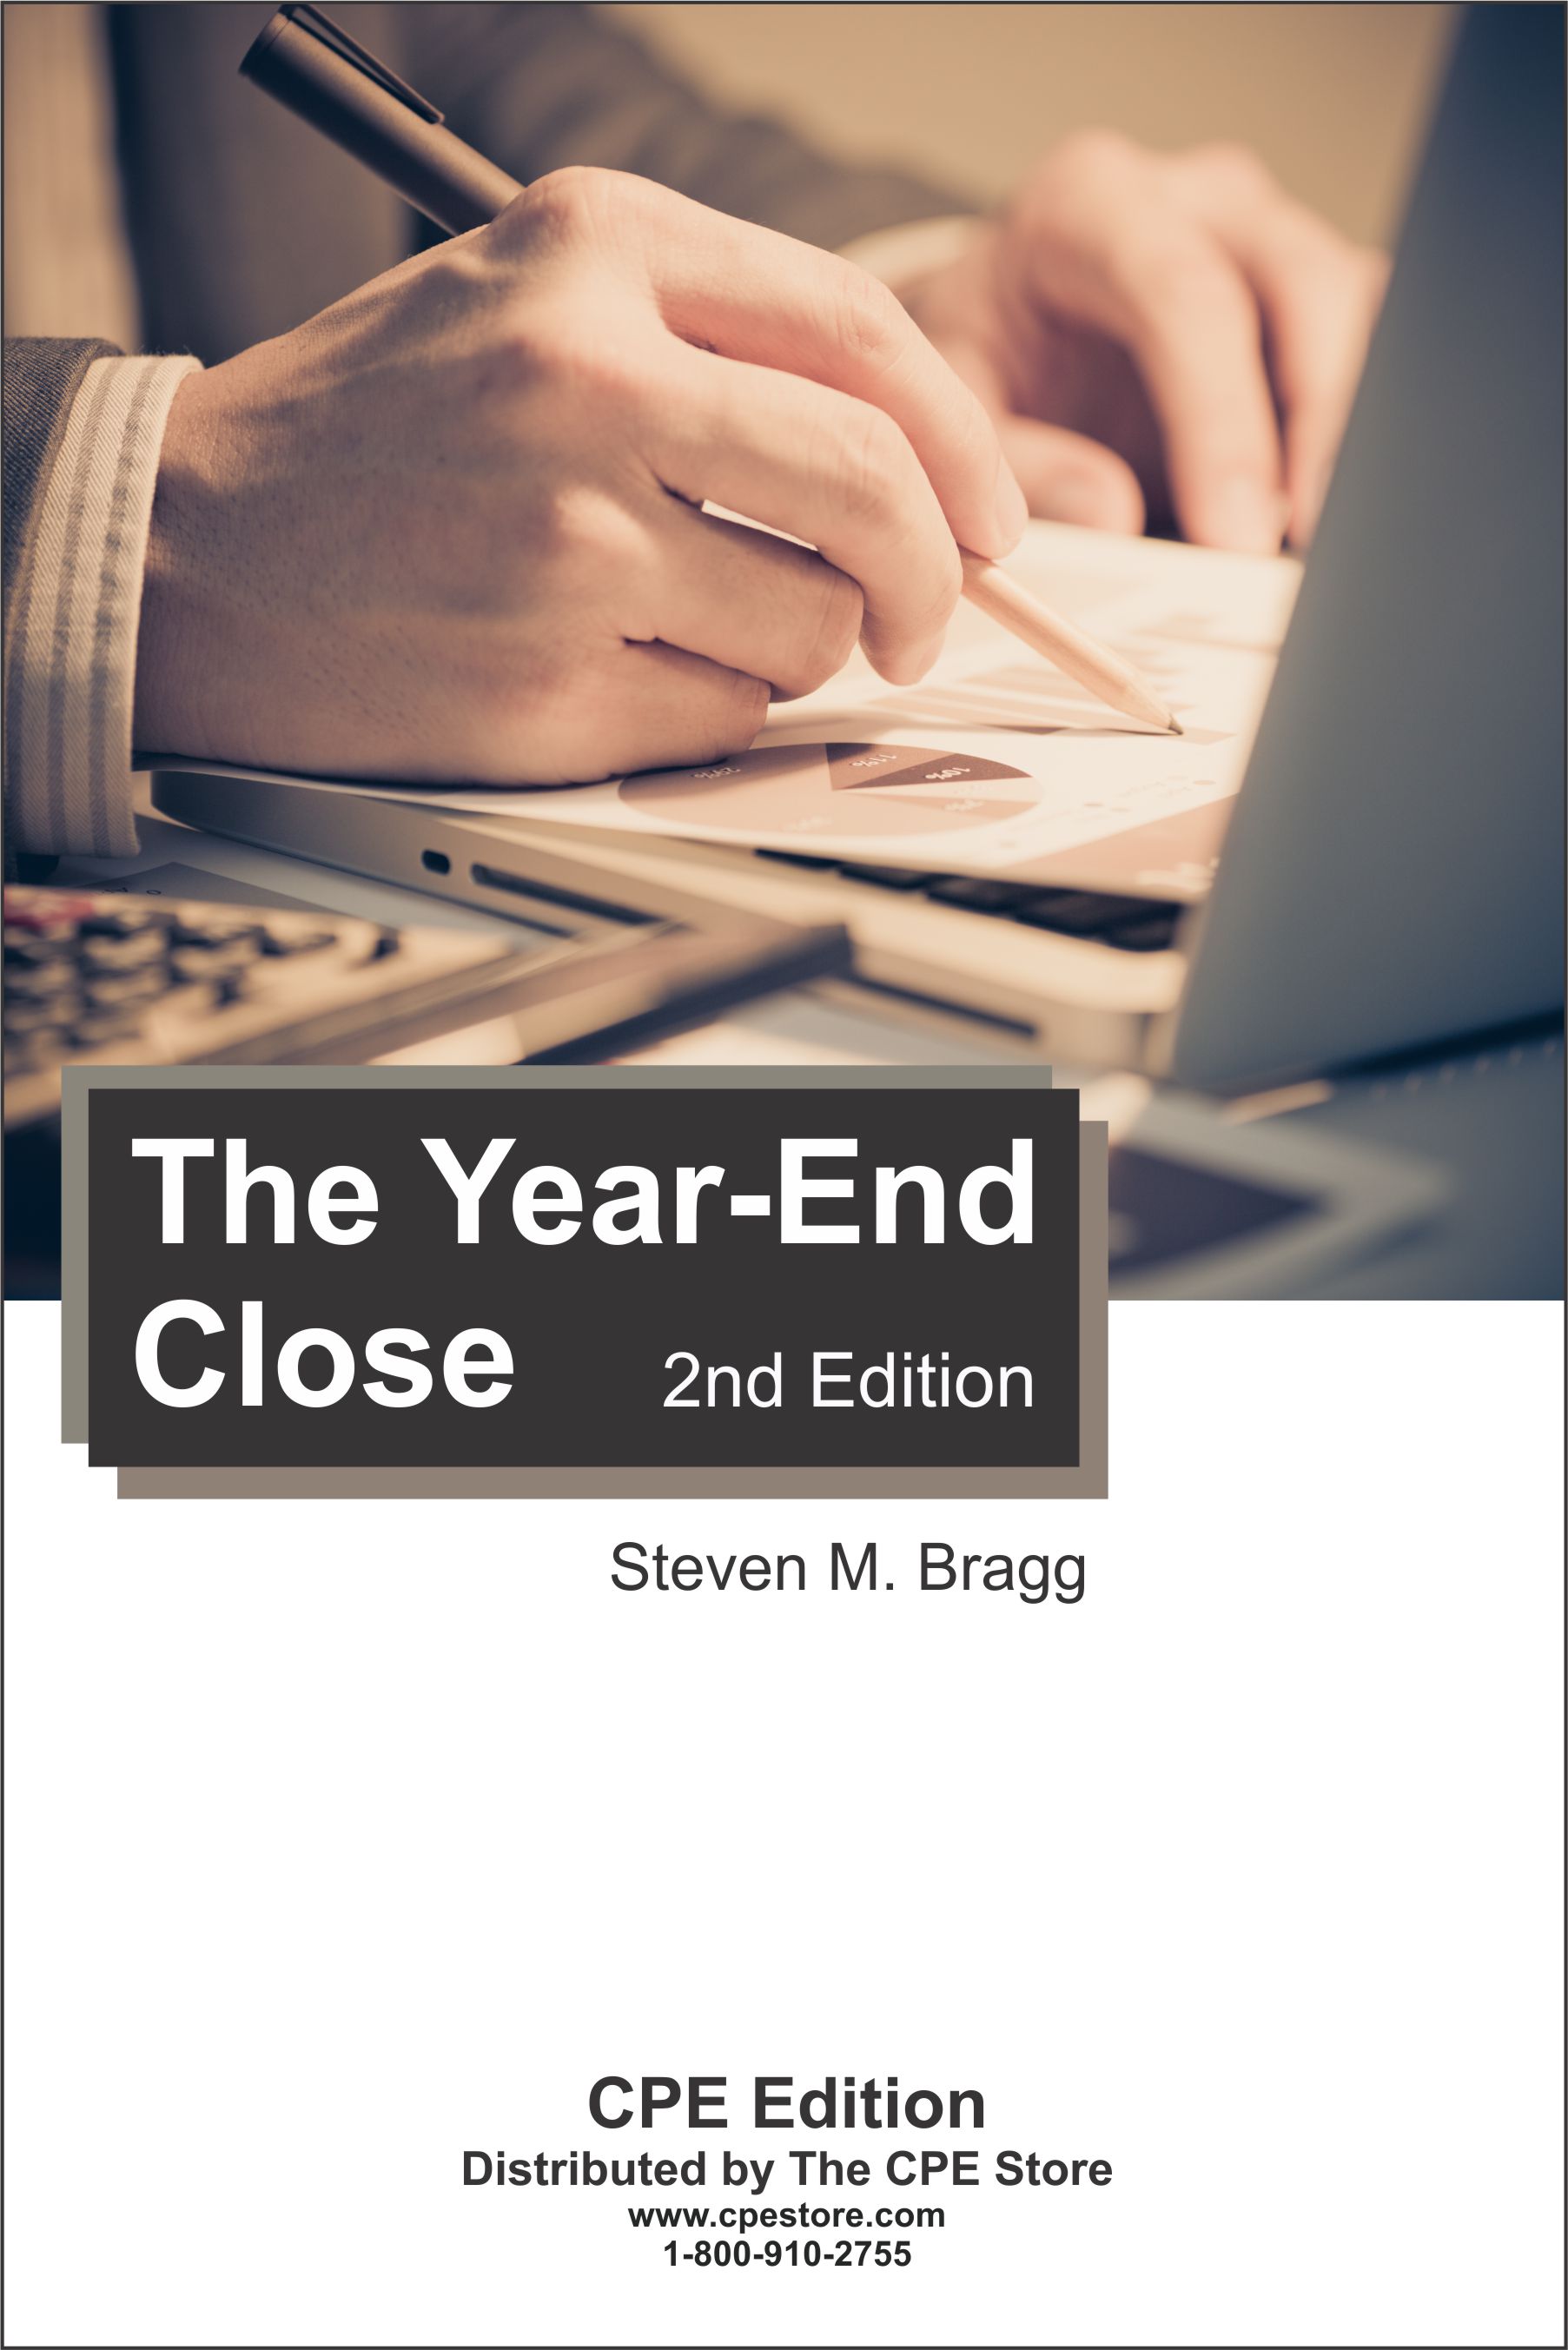 The Year-End Close